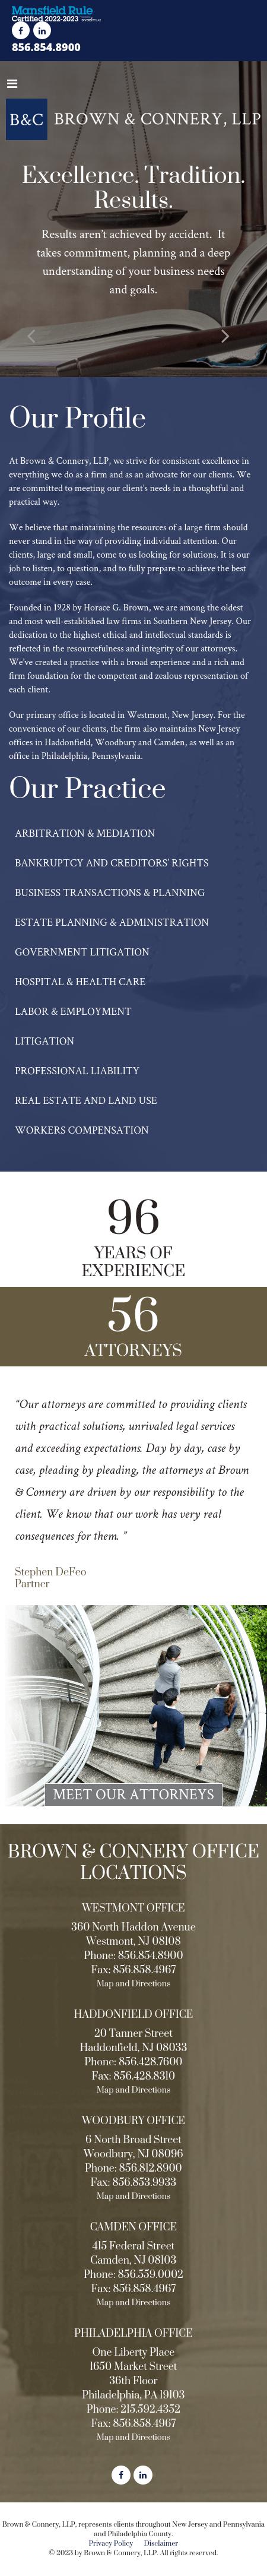 Brown & Connery, LLP - Westmont NJ Lawyers